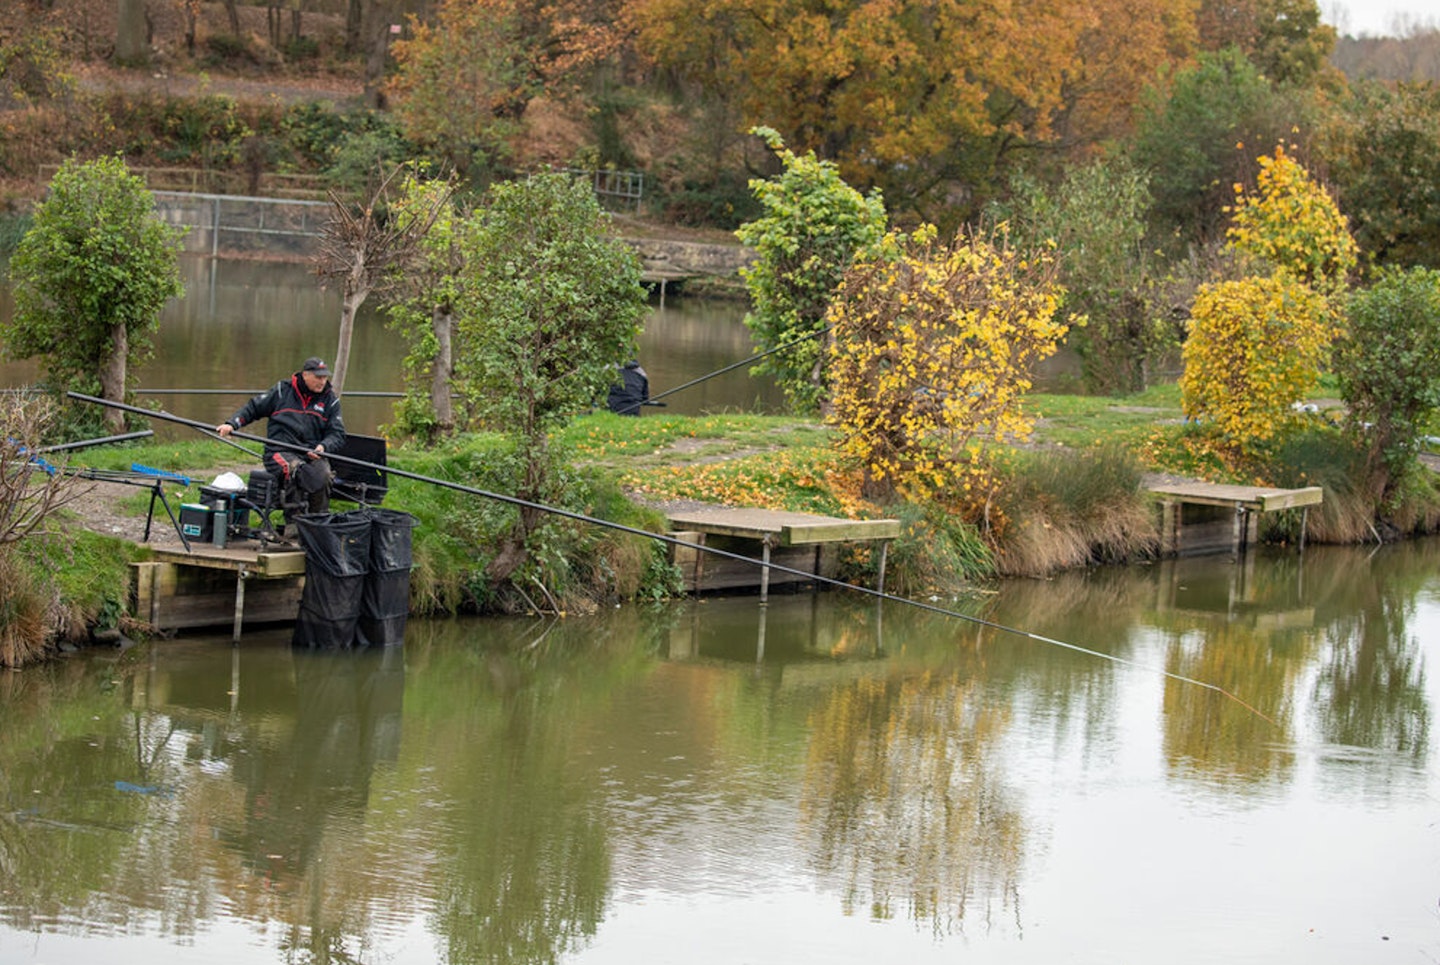 The Lanta Pool is a snake-type lake with a central island, and holds a great stock of F1s and carp